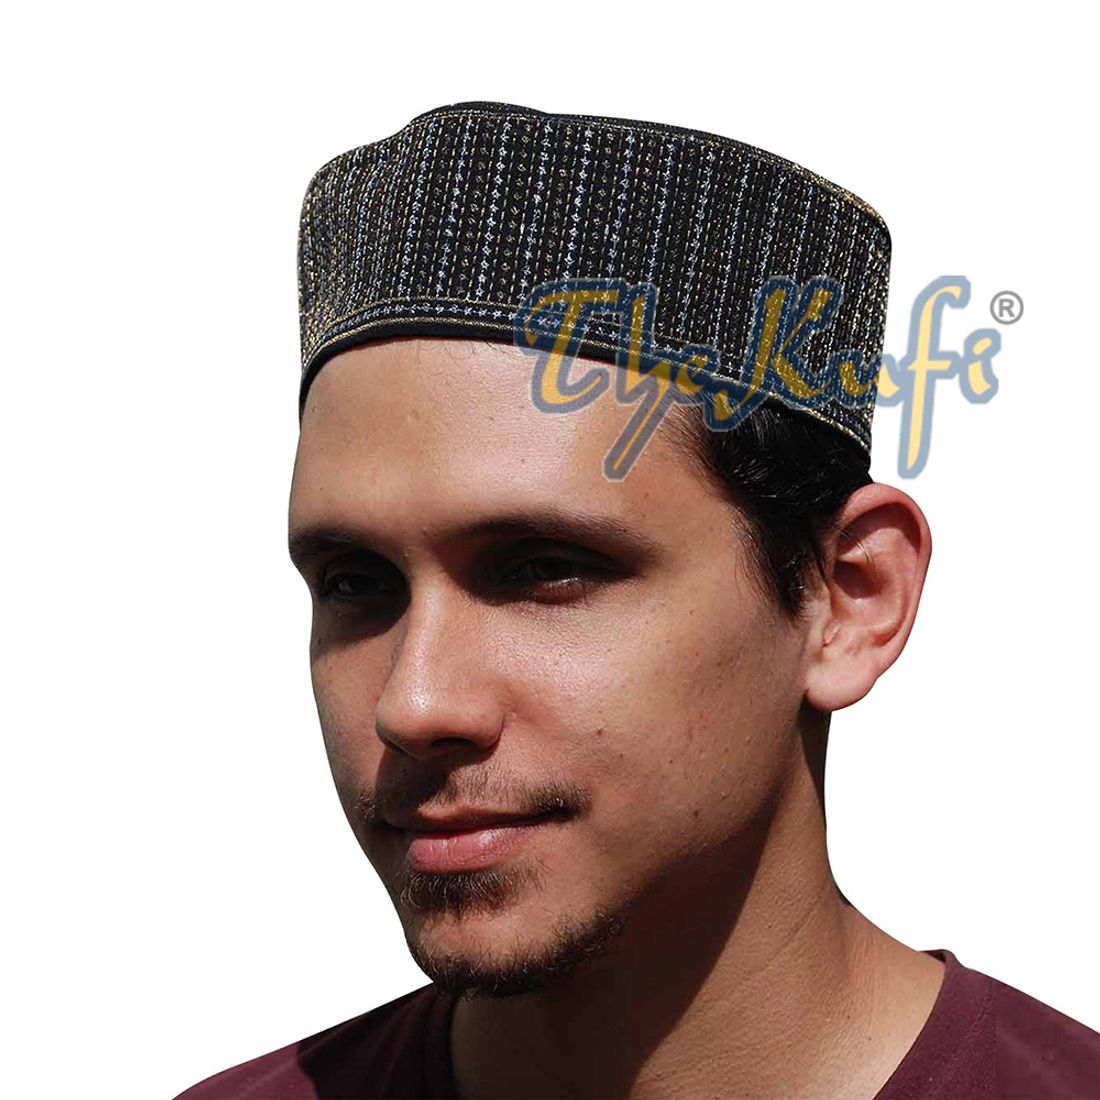 Rigid Metallic Thread Embroidered Kufi with Golden Top Ring